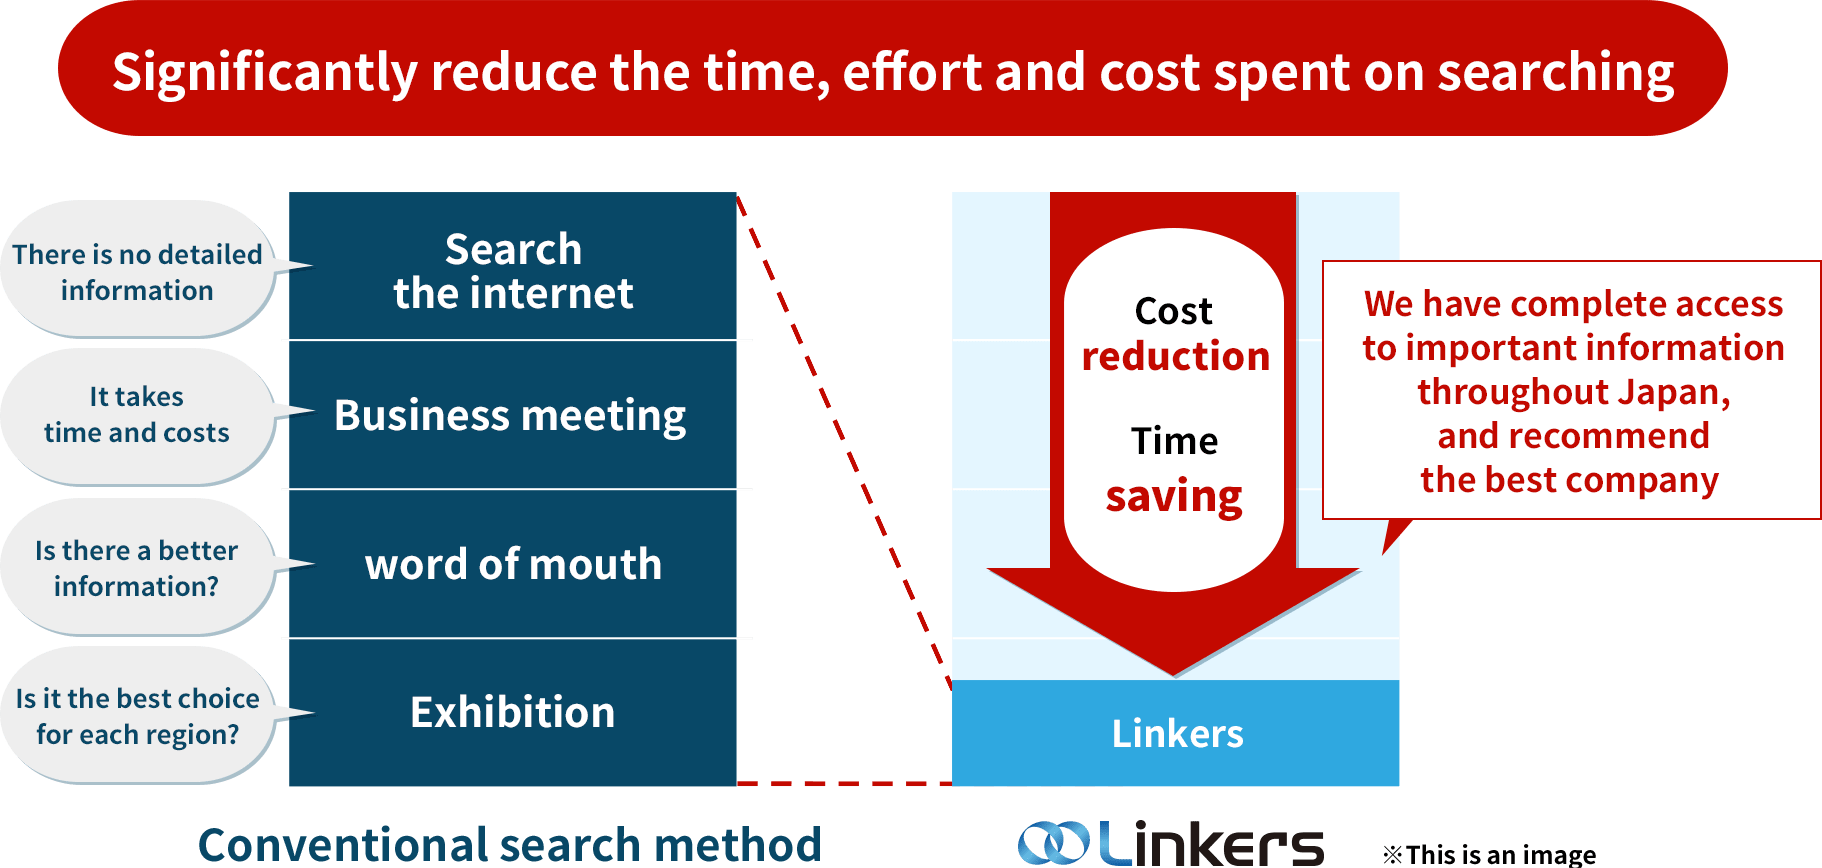 Significantly reduce the time, effort and cost spent on searching